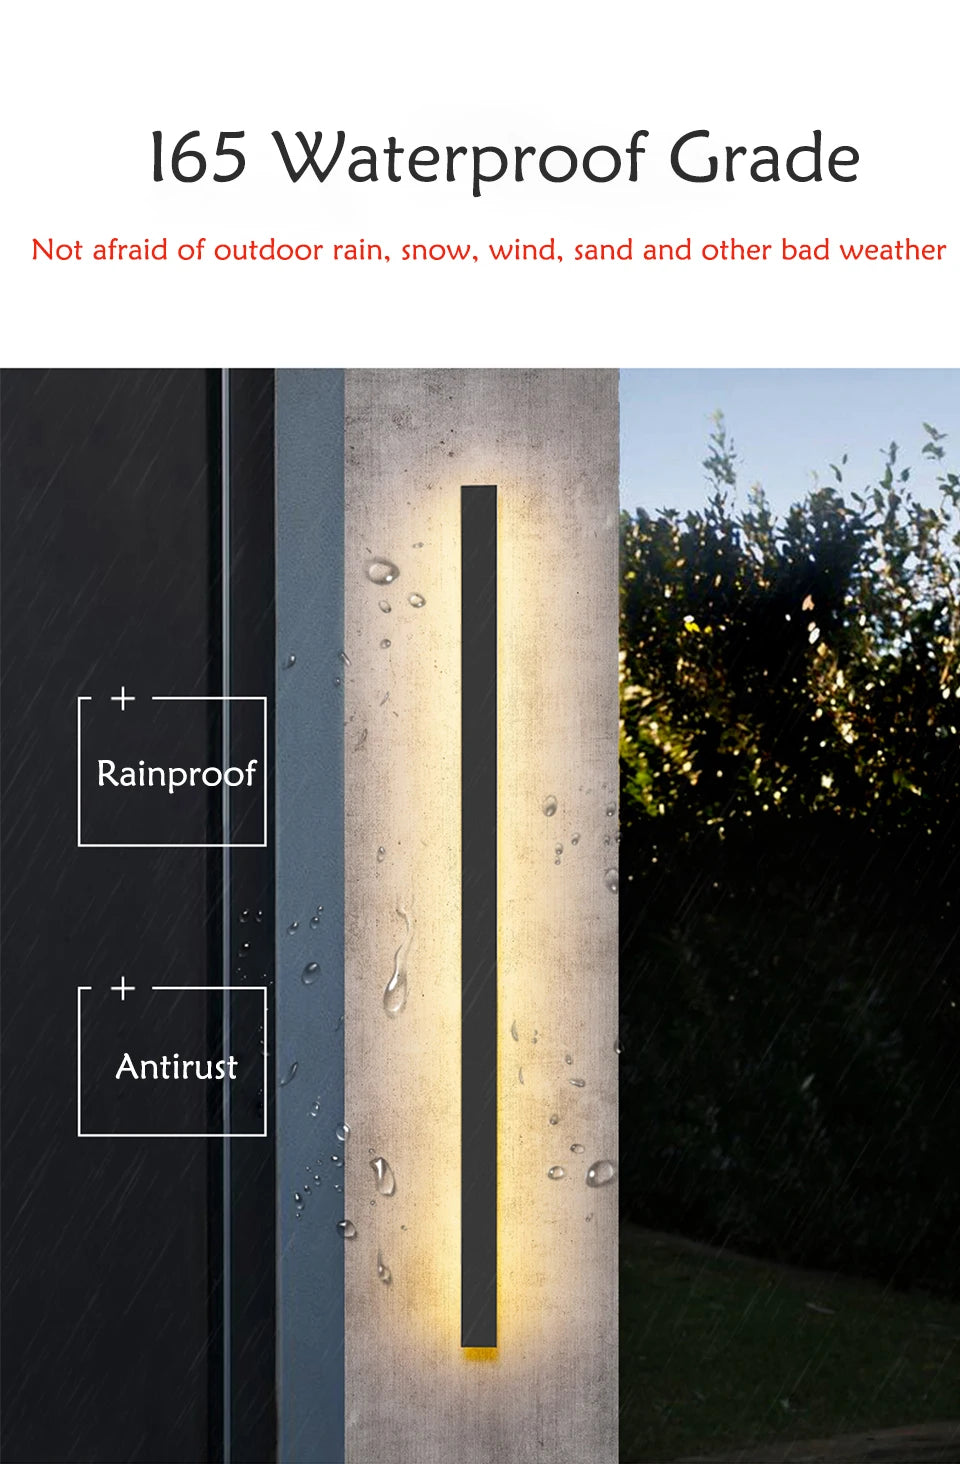 Durable outdoor lamp resistant to water, rust, and harsh weather.